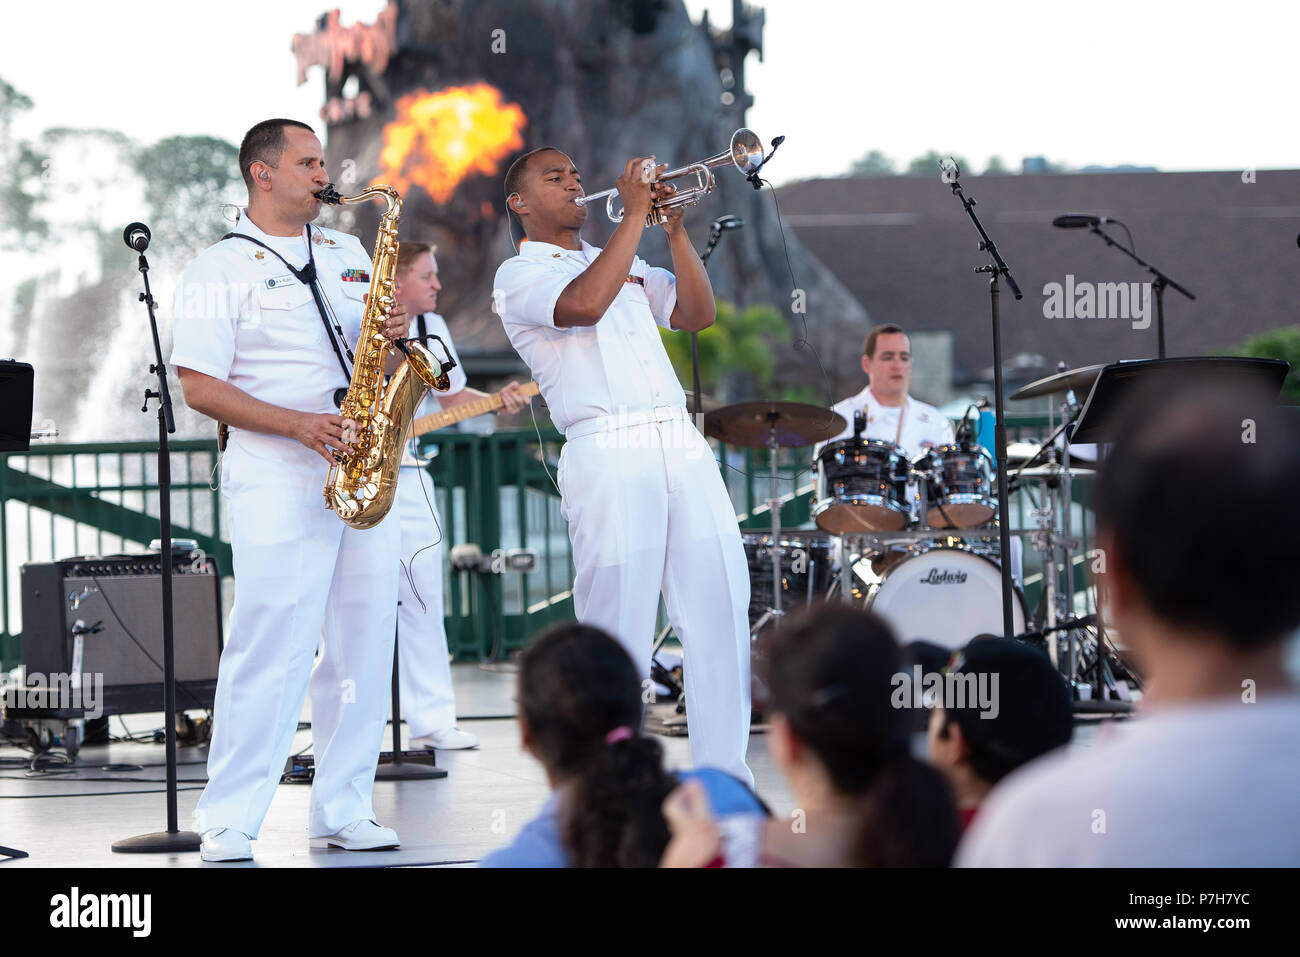 LAKE BUENA VISTA, Fla. (July 2, 2018) Musicians 1st Class Manuel Pelayo de Gongora, left, and David Smith, perform with the U.S. Navy Band Cruisers during a concert at the Disney Springs Marketplace Stage in Lake Buena Vista, Florida. The Navy Band performed in seven cities in Florida, connecting communities to the Navy and building awareness and support for the Navy. (U.S. Navy photo by Senior Chief Musician Adam Grimm/Released) Stock Photo